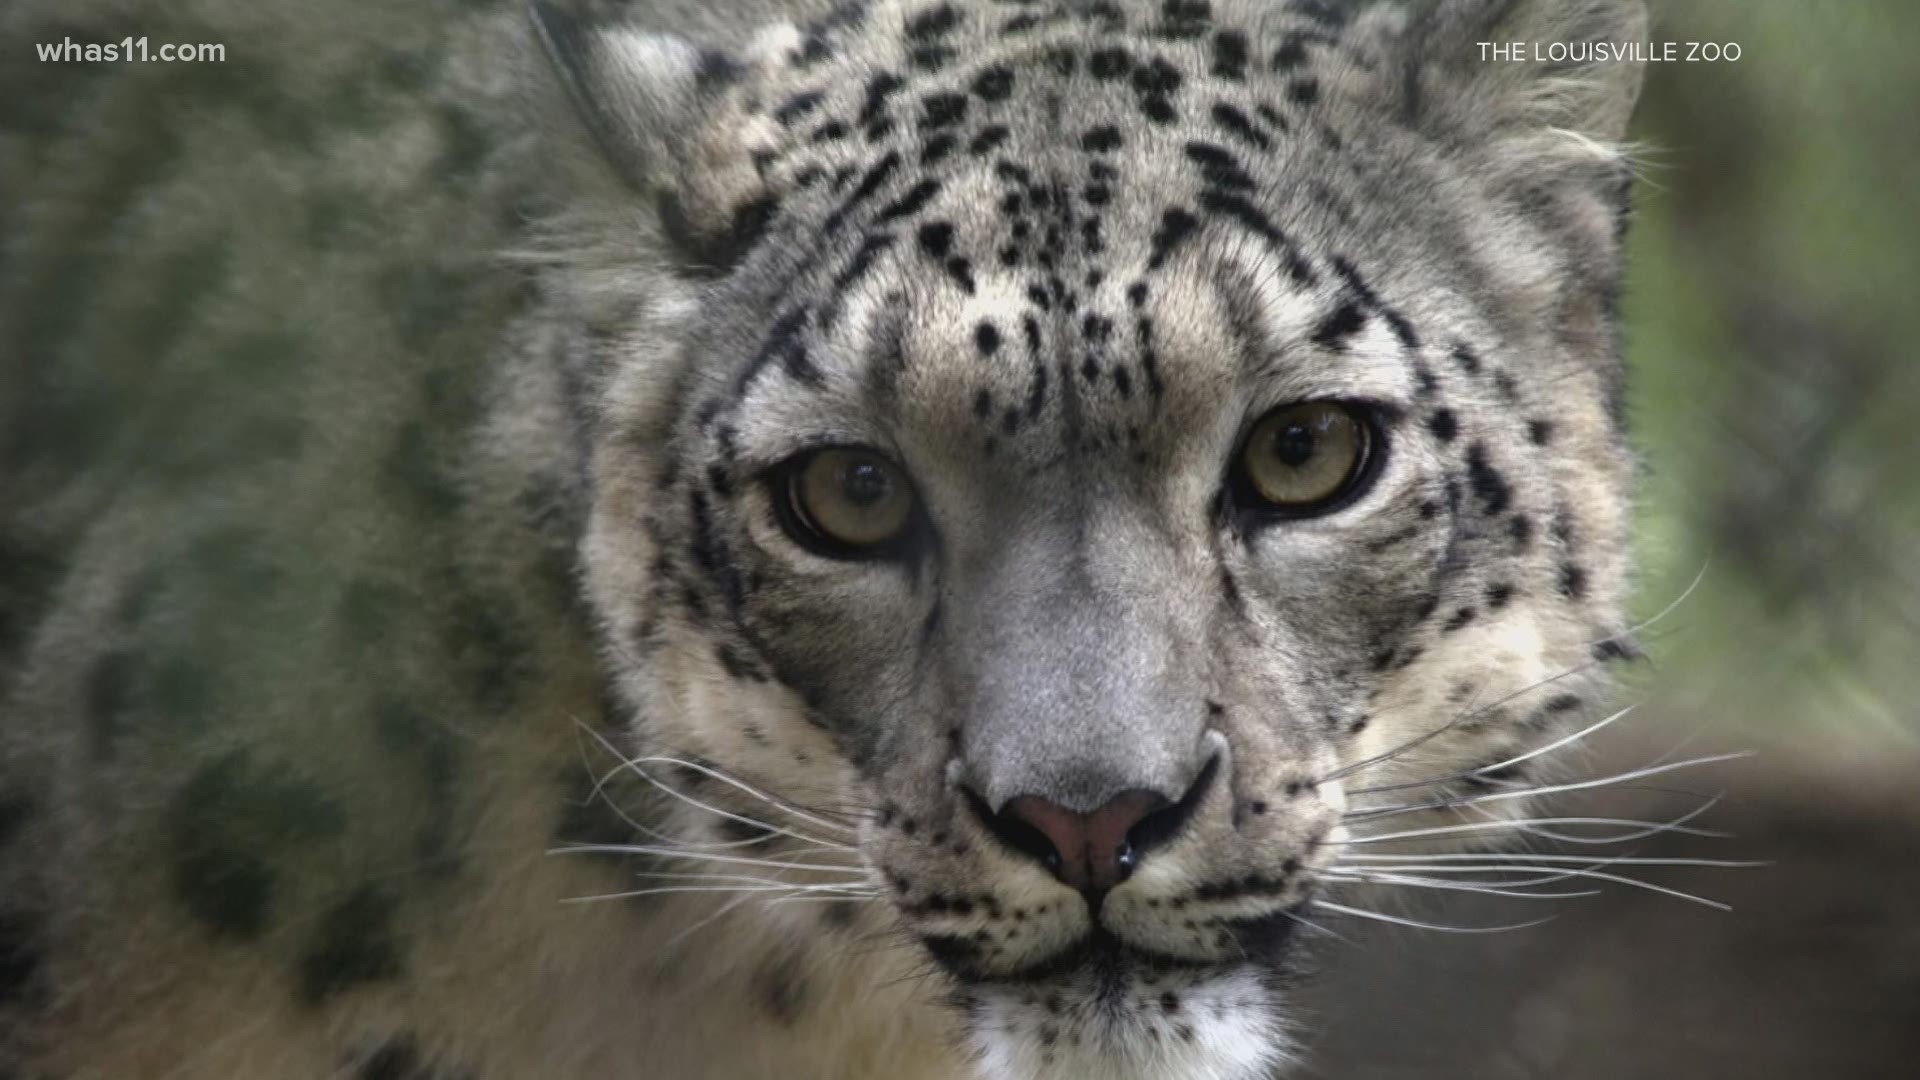 The zoo believes an asymptomatic human passed the virus to the snow leopard. The zoo says they are continuing their safety precautions and will remain open.